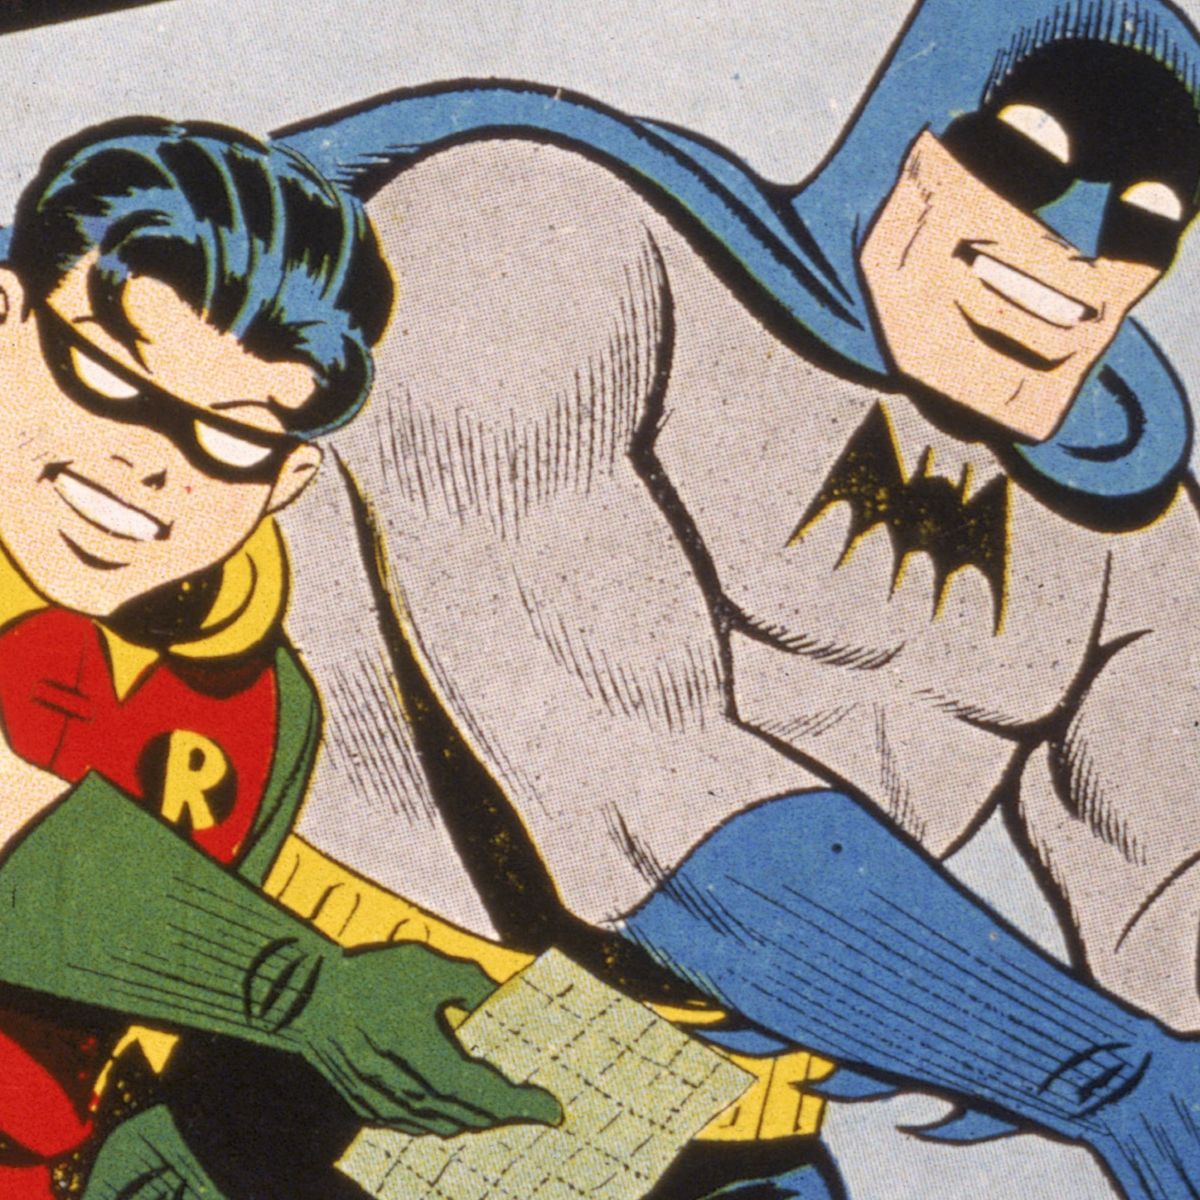 How the 1989 'Batman' movie forever changed the comic book character | CNN